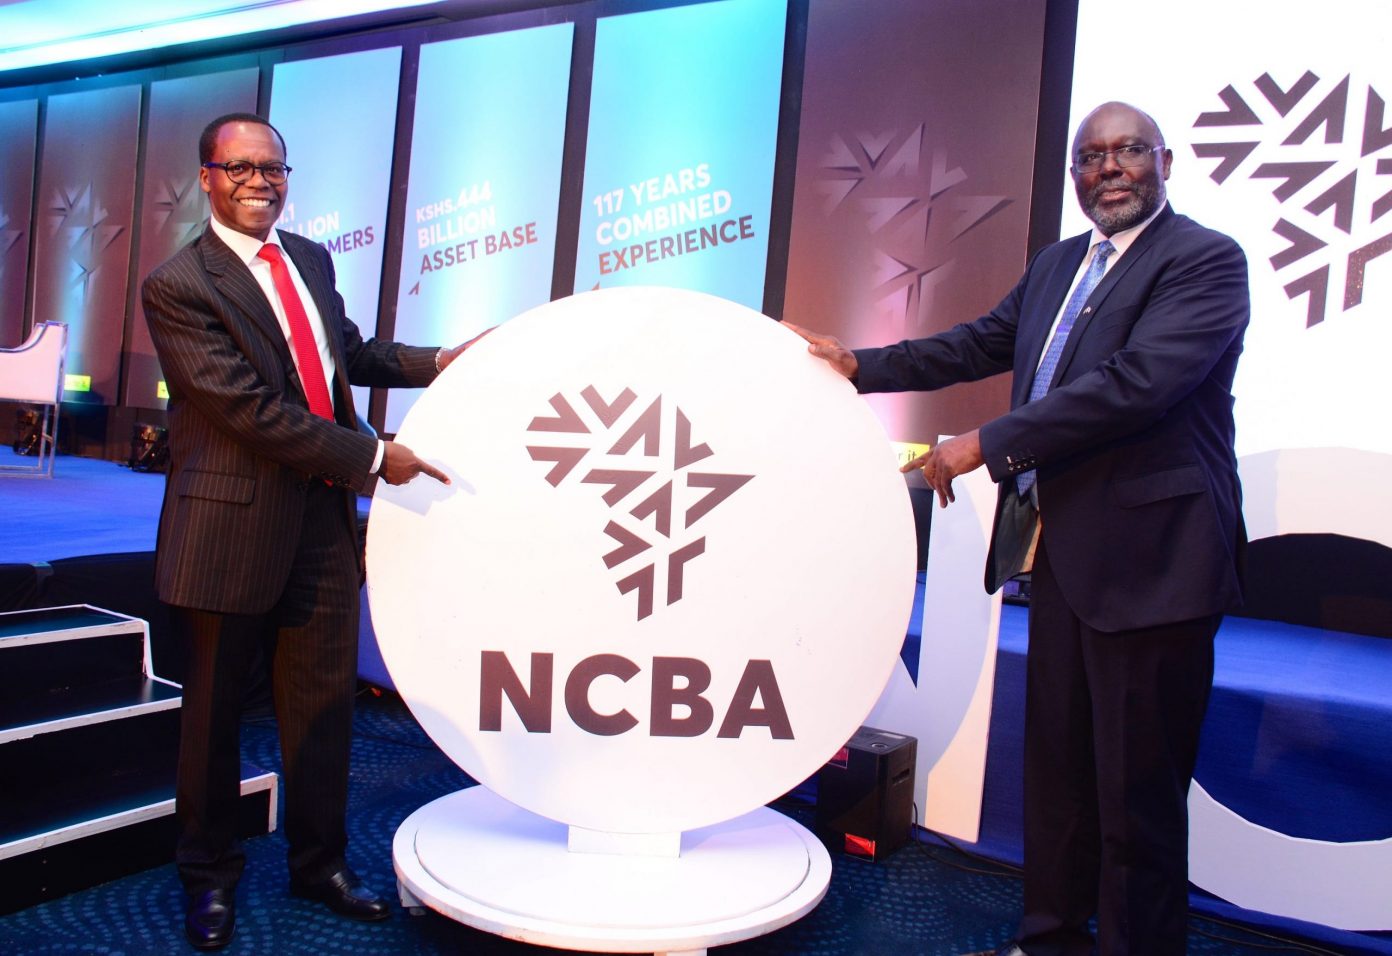 Kenya records 50pc drop in value of Mergers & Acquisition